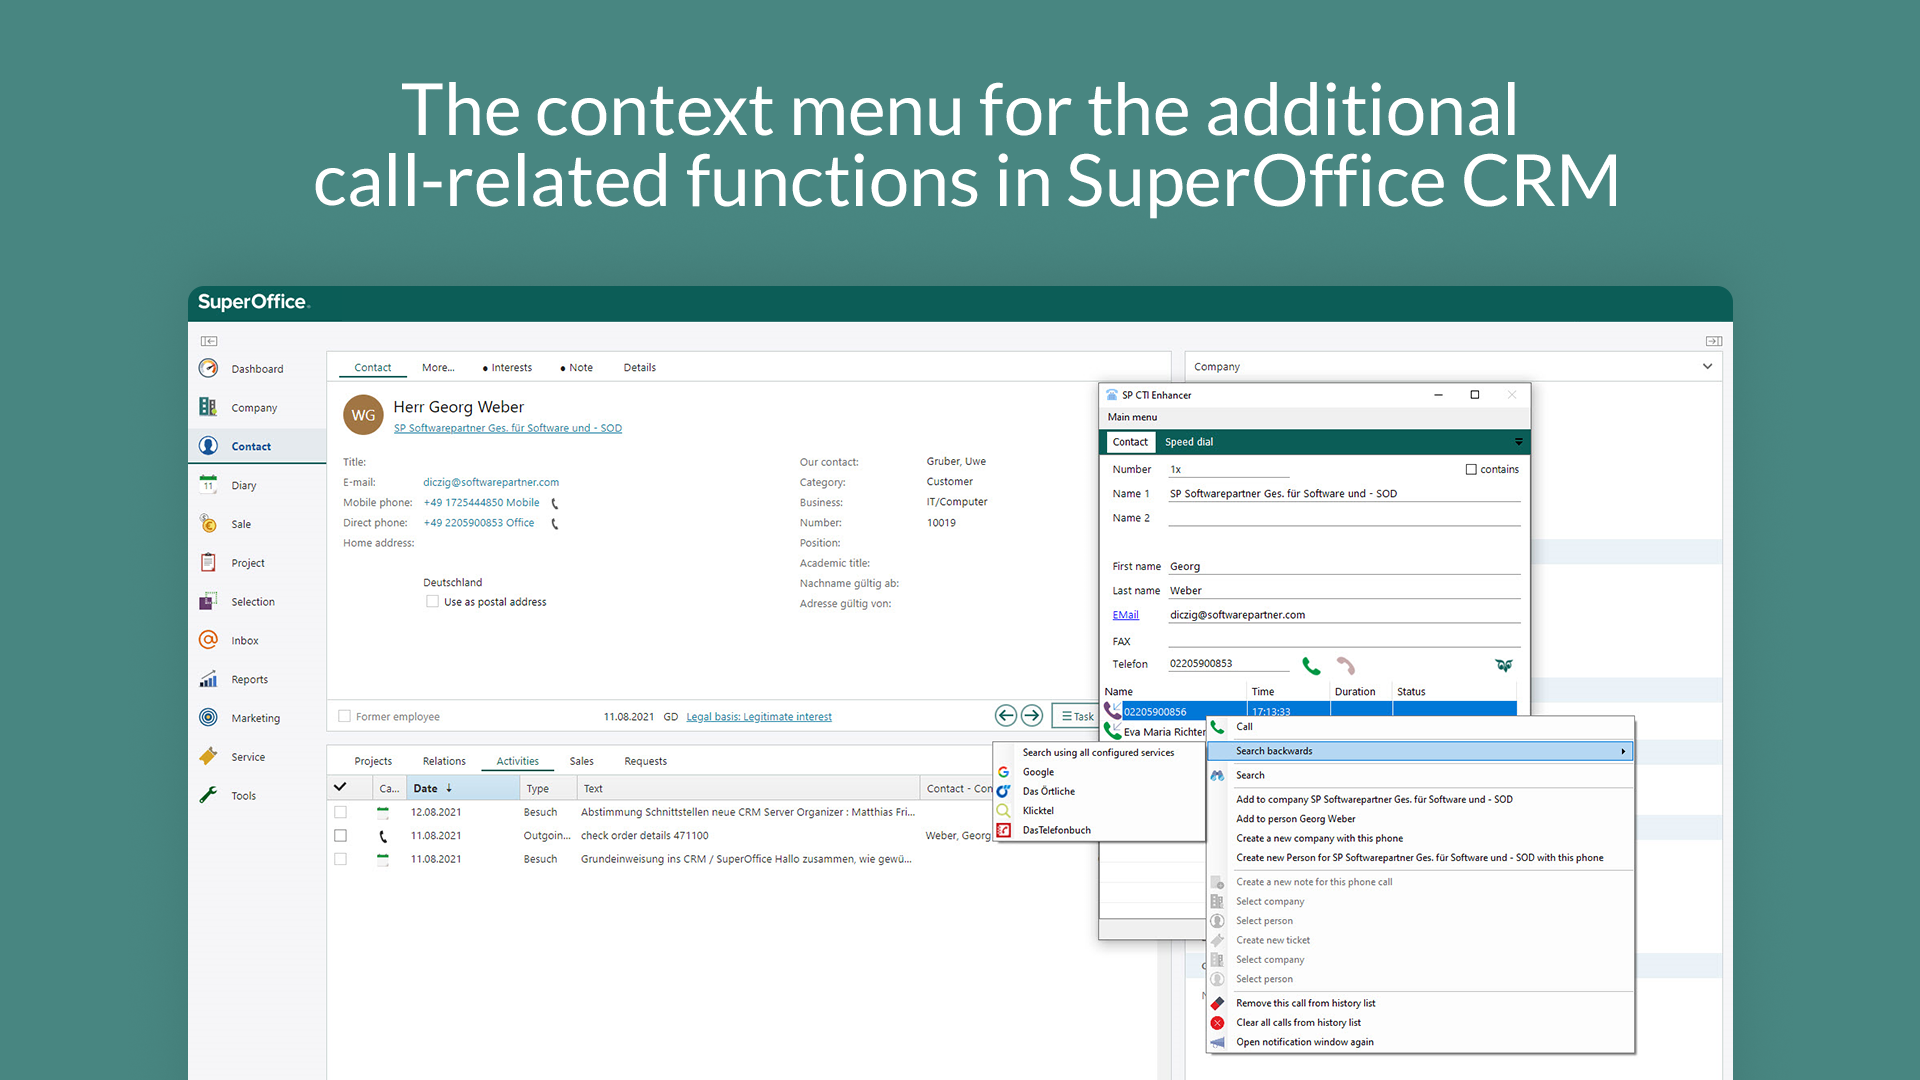 The context menu for the additional call-related functions in SuperOffice